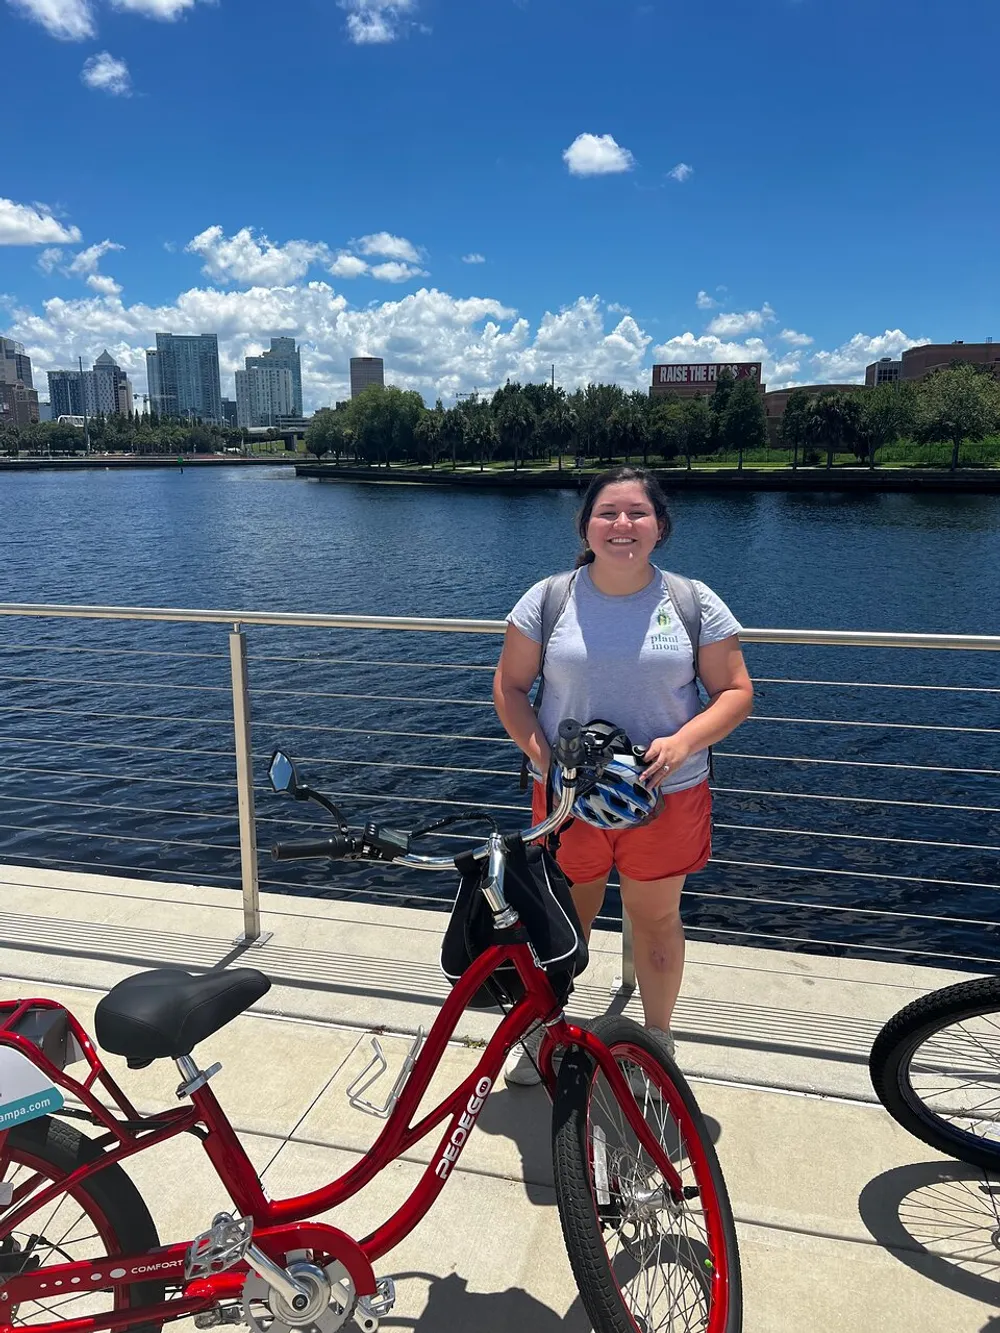 A person stands smiling next to a red bicycle on a sunny day with a cityscape and water in the background